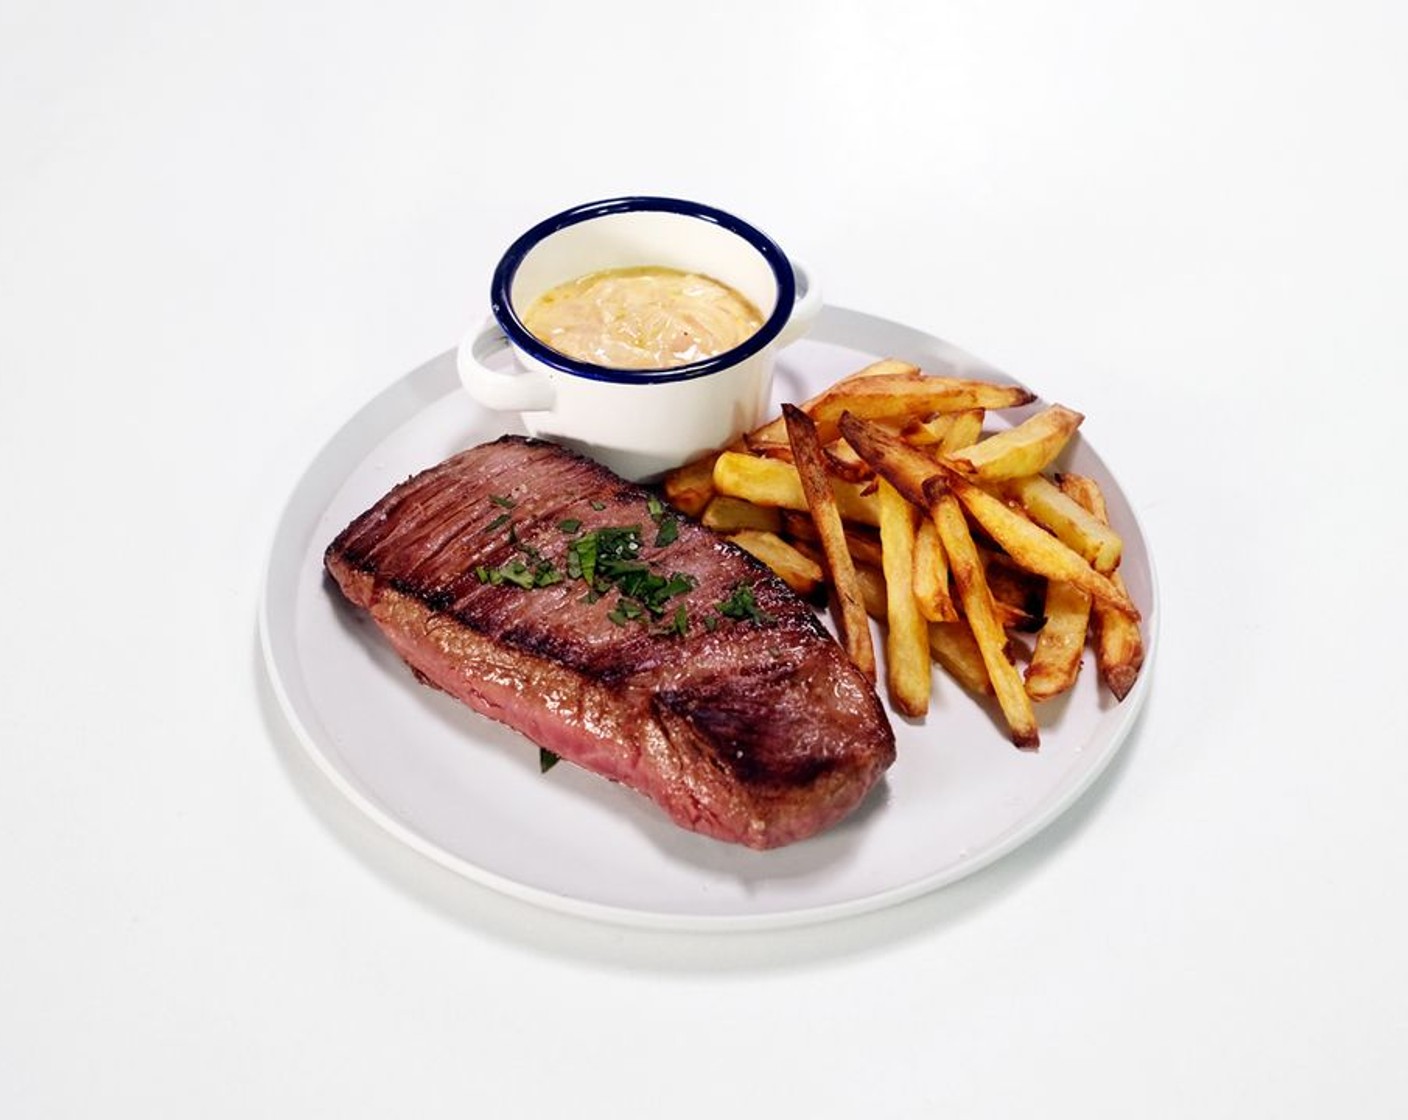 Bavette (Flank Steak) with Shallot Sauce and Fries